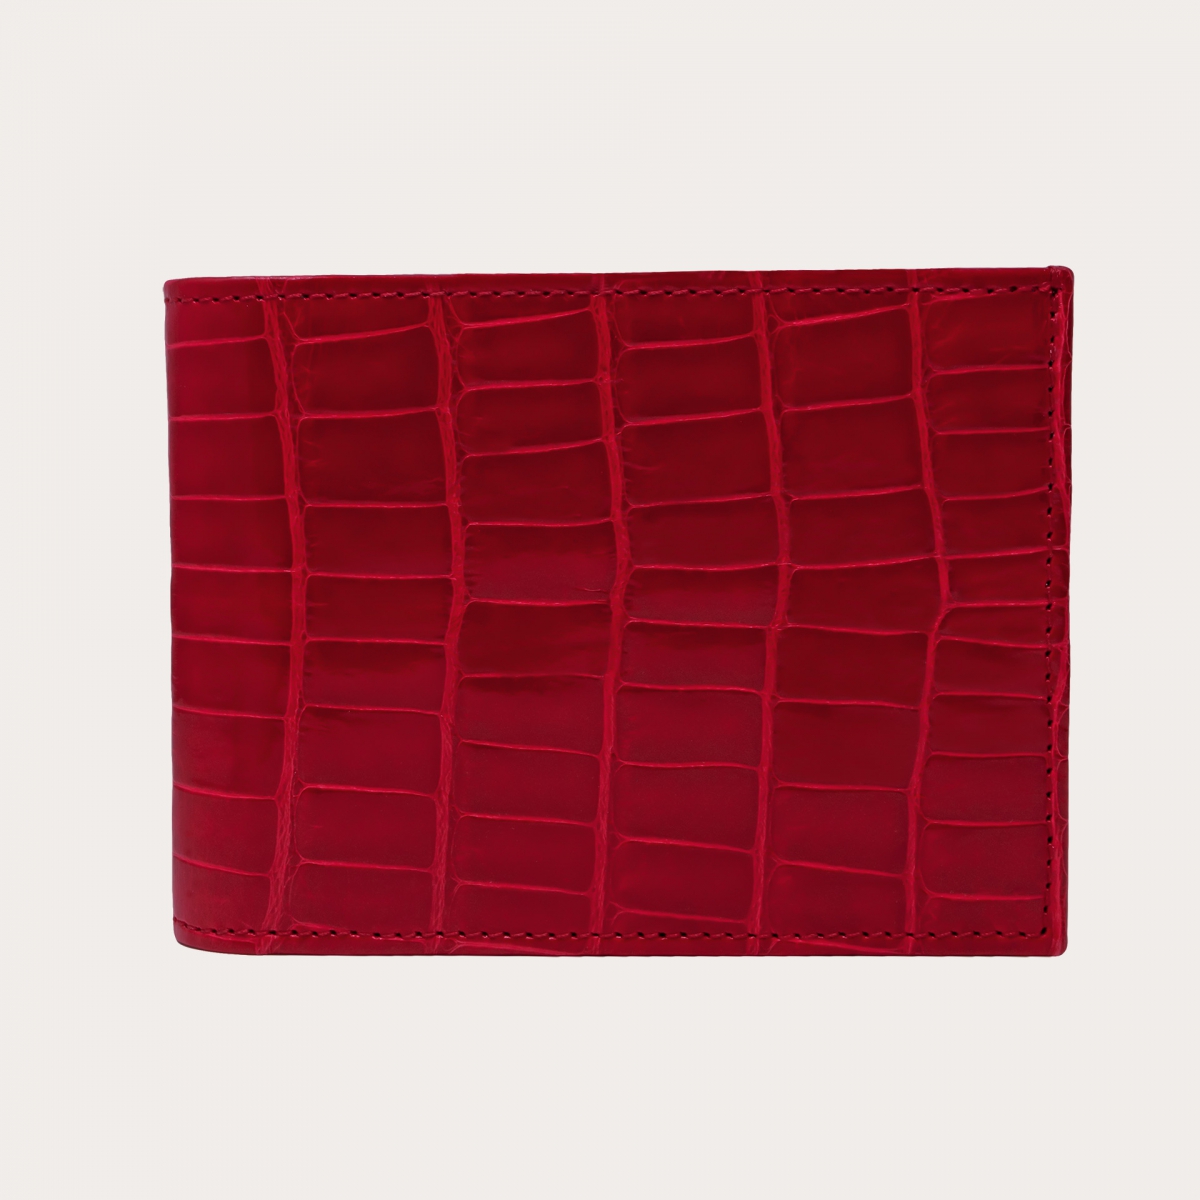 BRUCLE Elegant alligator wallet with coin purse, red